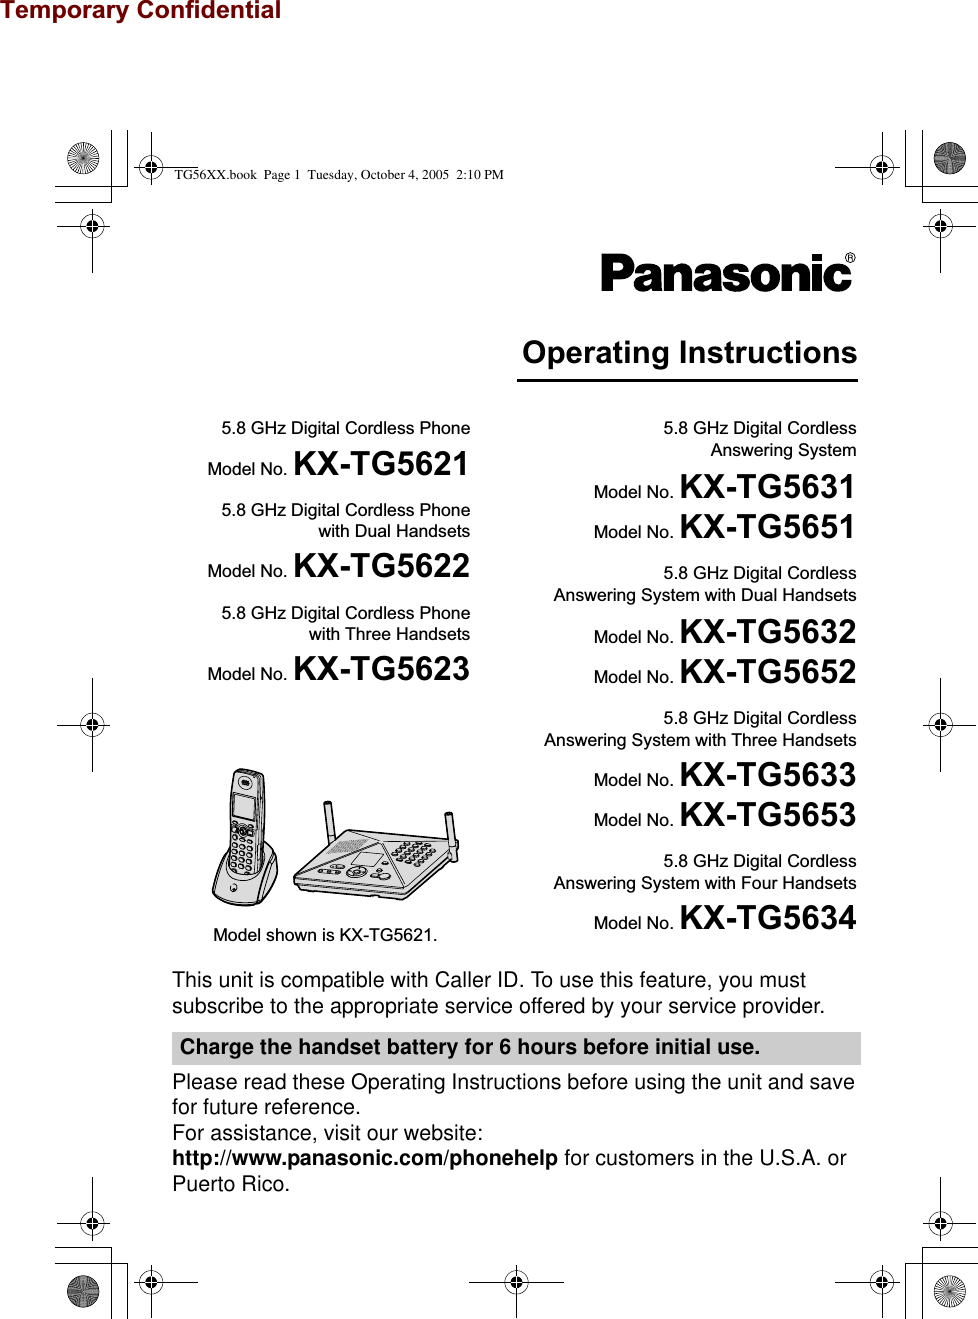 Temporary ConfidentialThis unit is compatible with Caller ID. To use this feature, you must subscribe to the appropriate service offered by your service provider.Please read these Operating Instructions before using the unit and save for future reference.For assistance, visit our website:http://www.panasonic.com/phonehelp for customers in the U.S.A. or Puerto Rico.Charge the handset battery for 6 hours before initial use.Operating Instructions5.8 GHz Digital Cordless PhoneModel No. KX-TG56215.8 GHz Digital Cordless Phonewith Dual HandsetsModel No. KX-TG56225.8 GHz Digital Cordless Phonewith Three HandsetsModel No. KX-TG56235.8 GHz Digital Cordless Answering SystemModel No. KX-TG5631Model No. KX-TG56515.8 GHz Digital Cordless Answering System with Dual HandsetsModel No. KX-TG5632Model No. KX-TG56525.8 GHz Digital Cordless Answering System with Three HandsetsModel No. KX-TG5633Model No. KX-TG56535.8 GHz Digital Cordless Answering System with Four HandsetsModel No. KX-TG5634Model shown is KX-TG5621.TG56XX.book  Page 1  Tuesday, October 4, 2005  2:10 PM